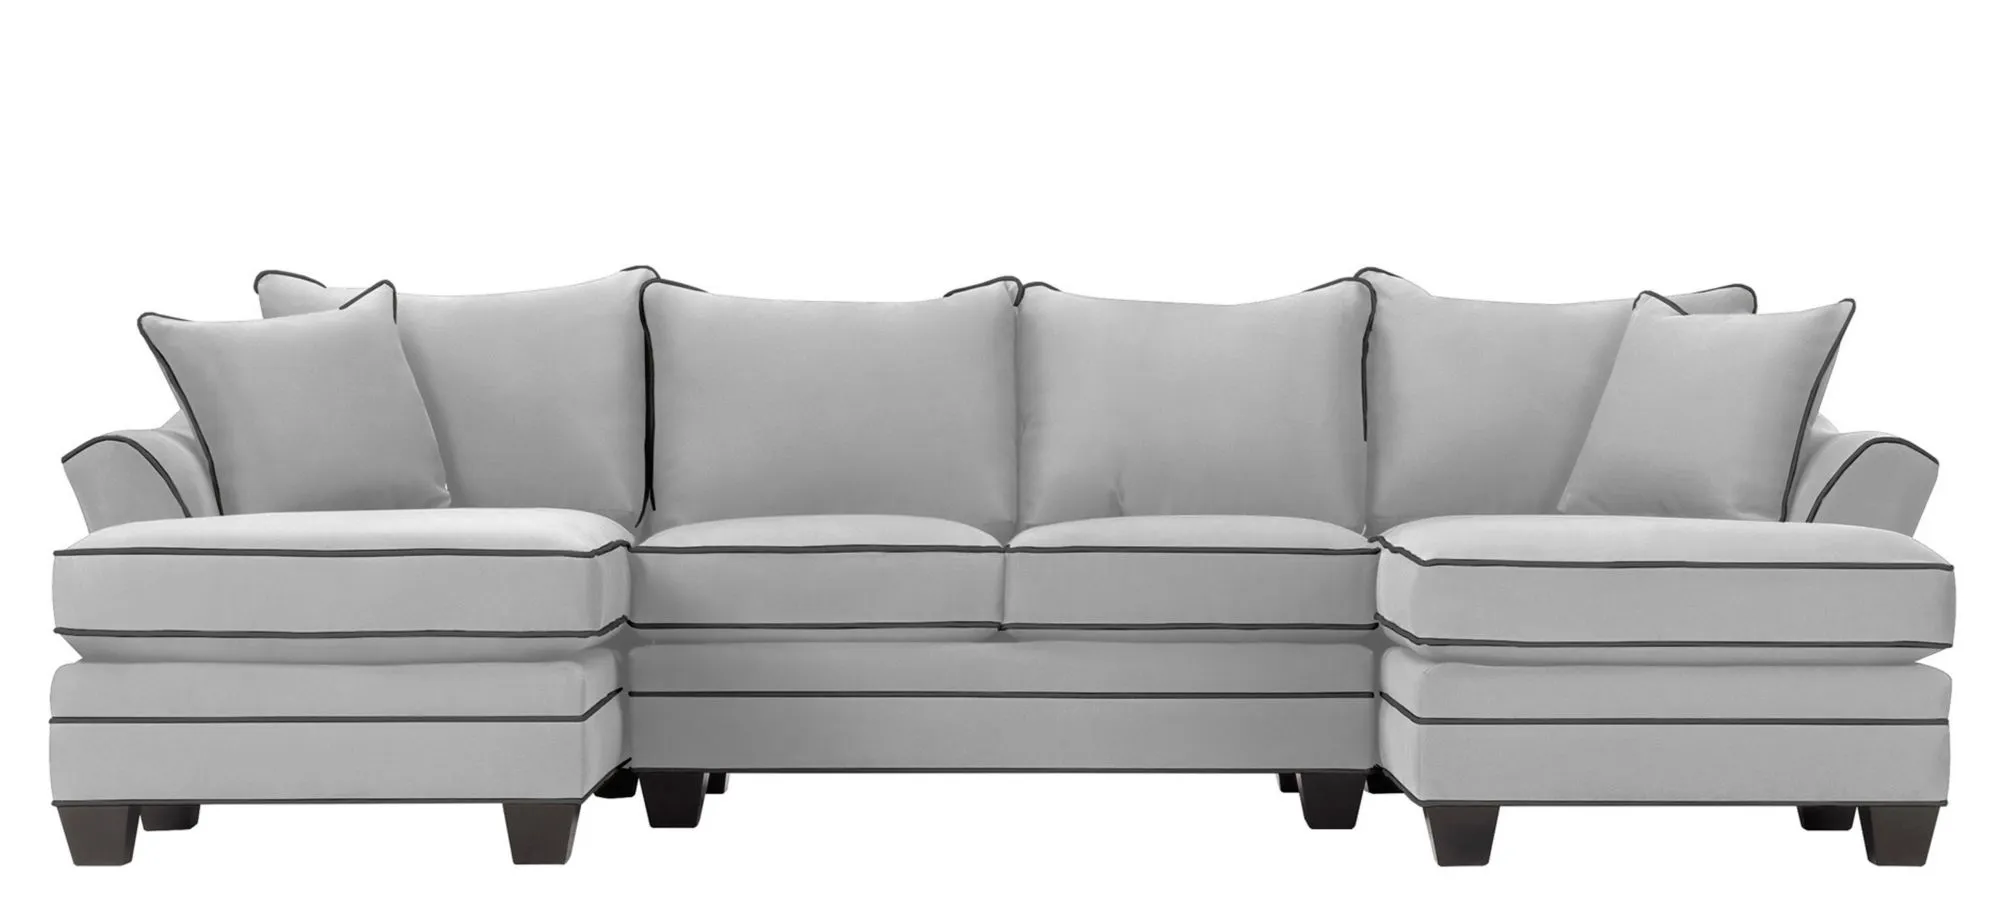 Foresthill 3-pc. Symmetrical Chaise Sectional Sofa in Suede So Soft Platinum/Slate by H.M. Richards